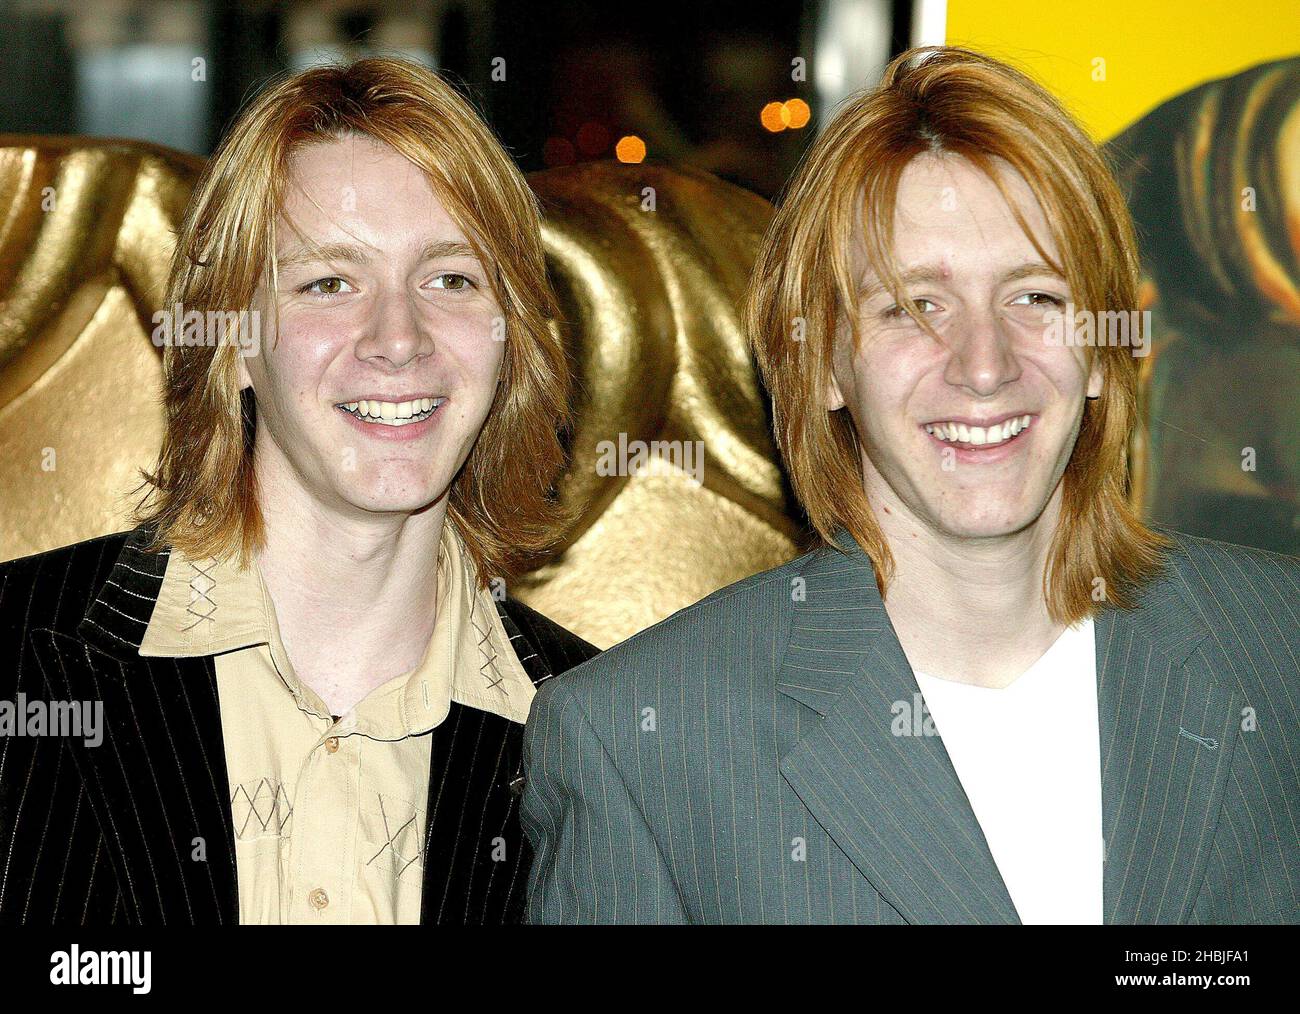 Jamie and Oliver Phelps pose at arrivals at the "British Academy Children's Film & Television Awards" at the London Hilton, Park Lane on November 27, 2004 in London. Stock Photo